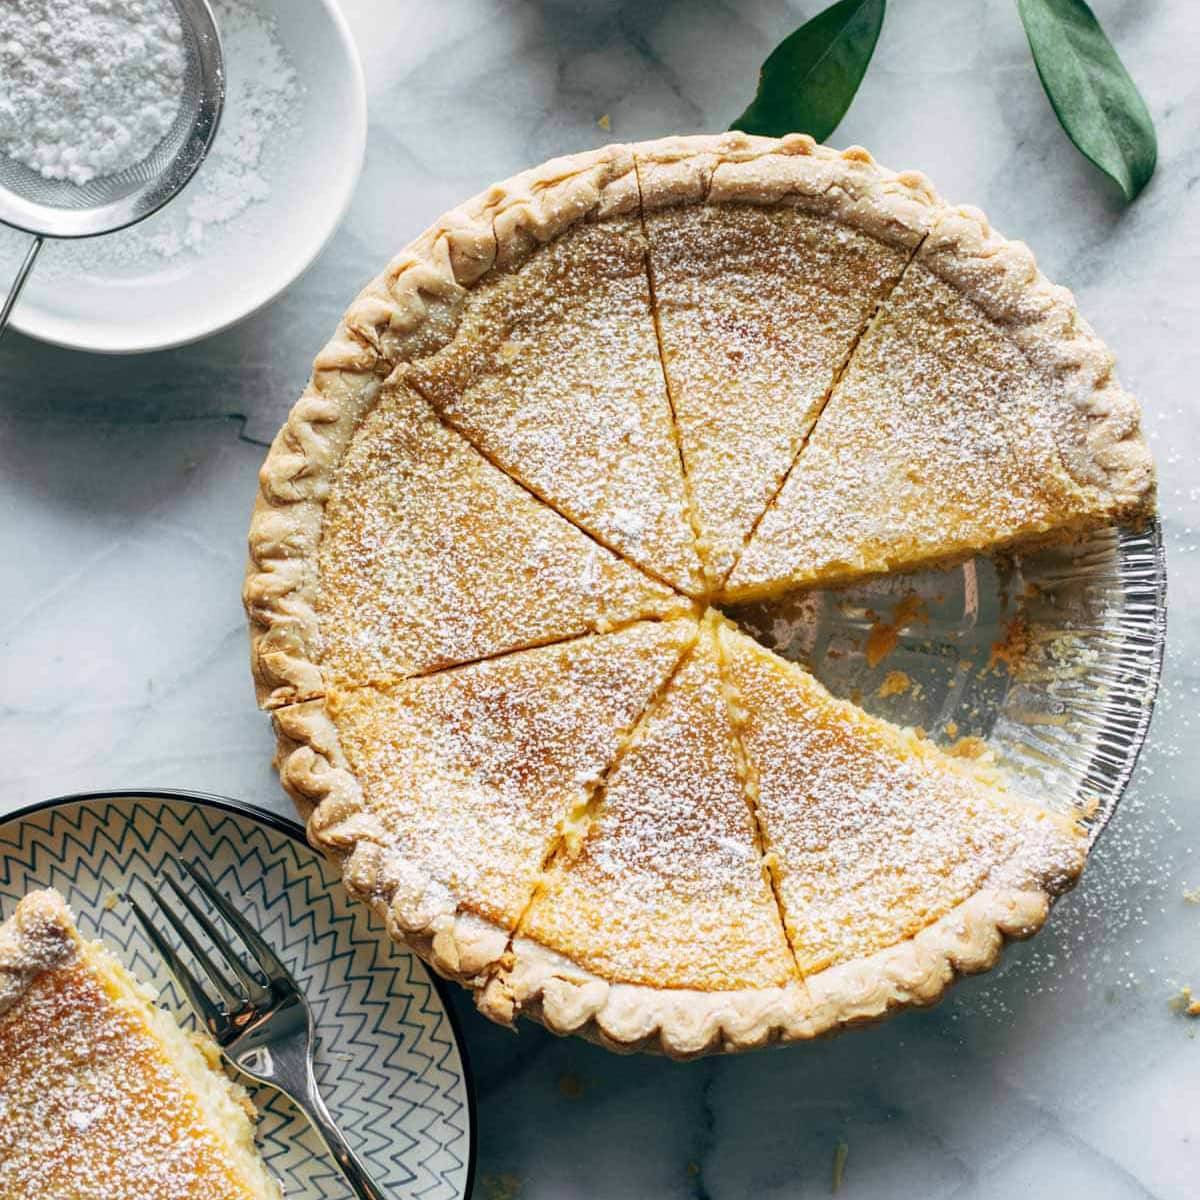 A lemon pie with a slice taken out.